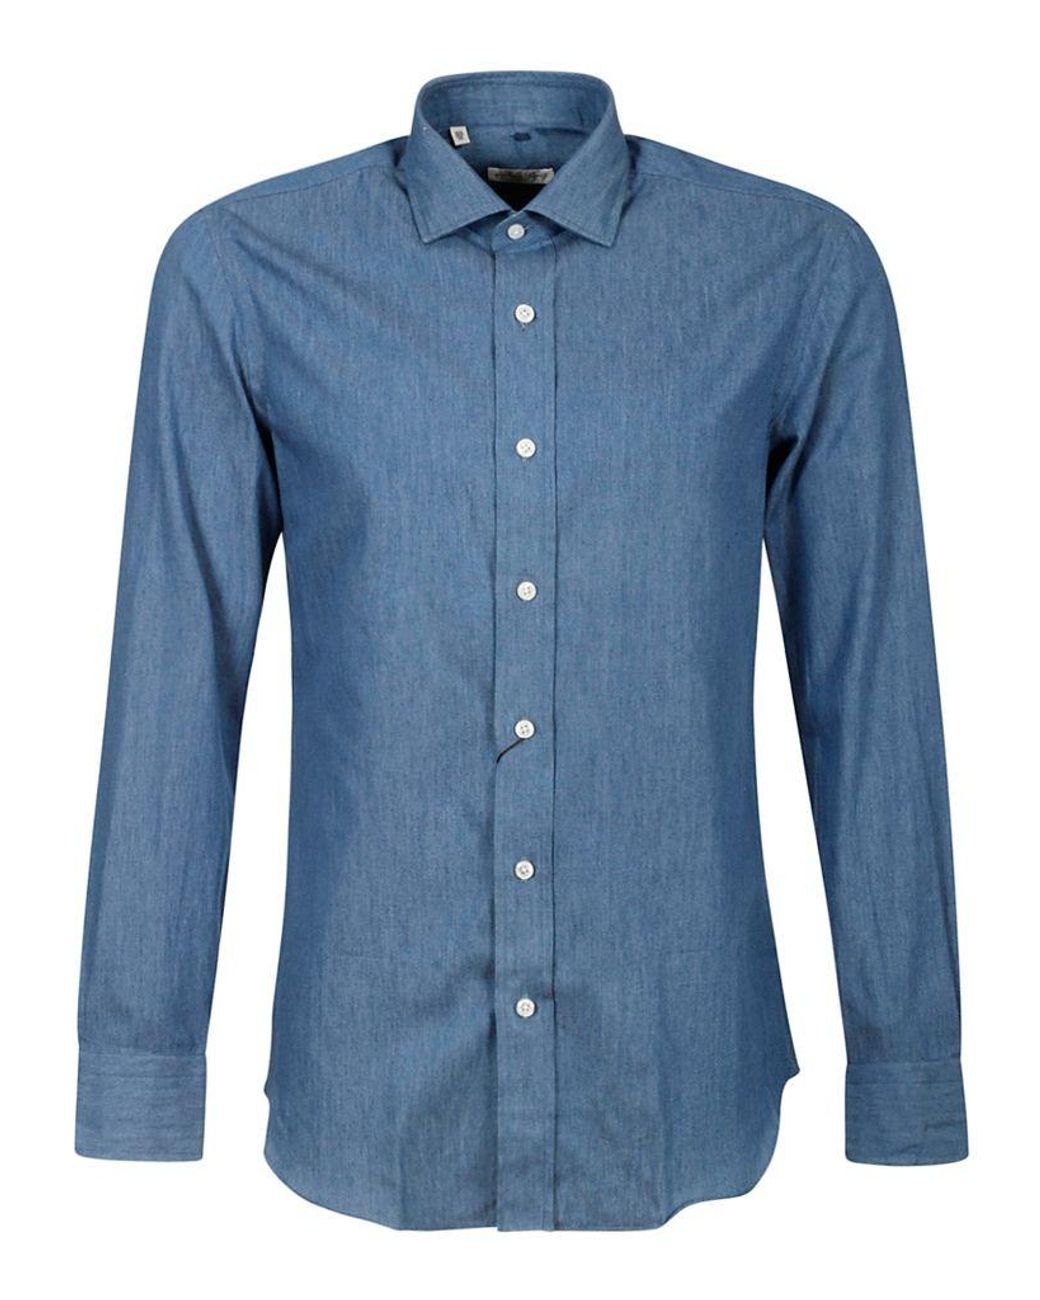 Salvatore Piccolo Cotton Shirt in Blue for Men Mens Clothing Shirts Casual shirts and button-up shirts 